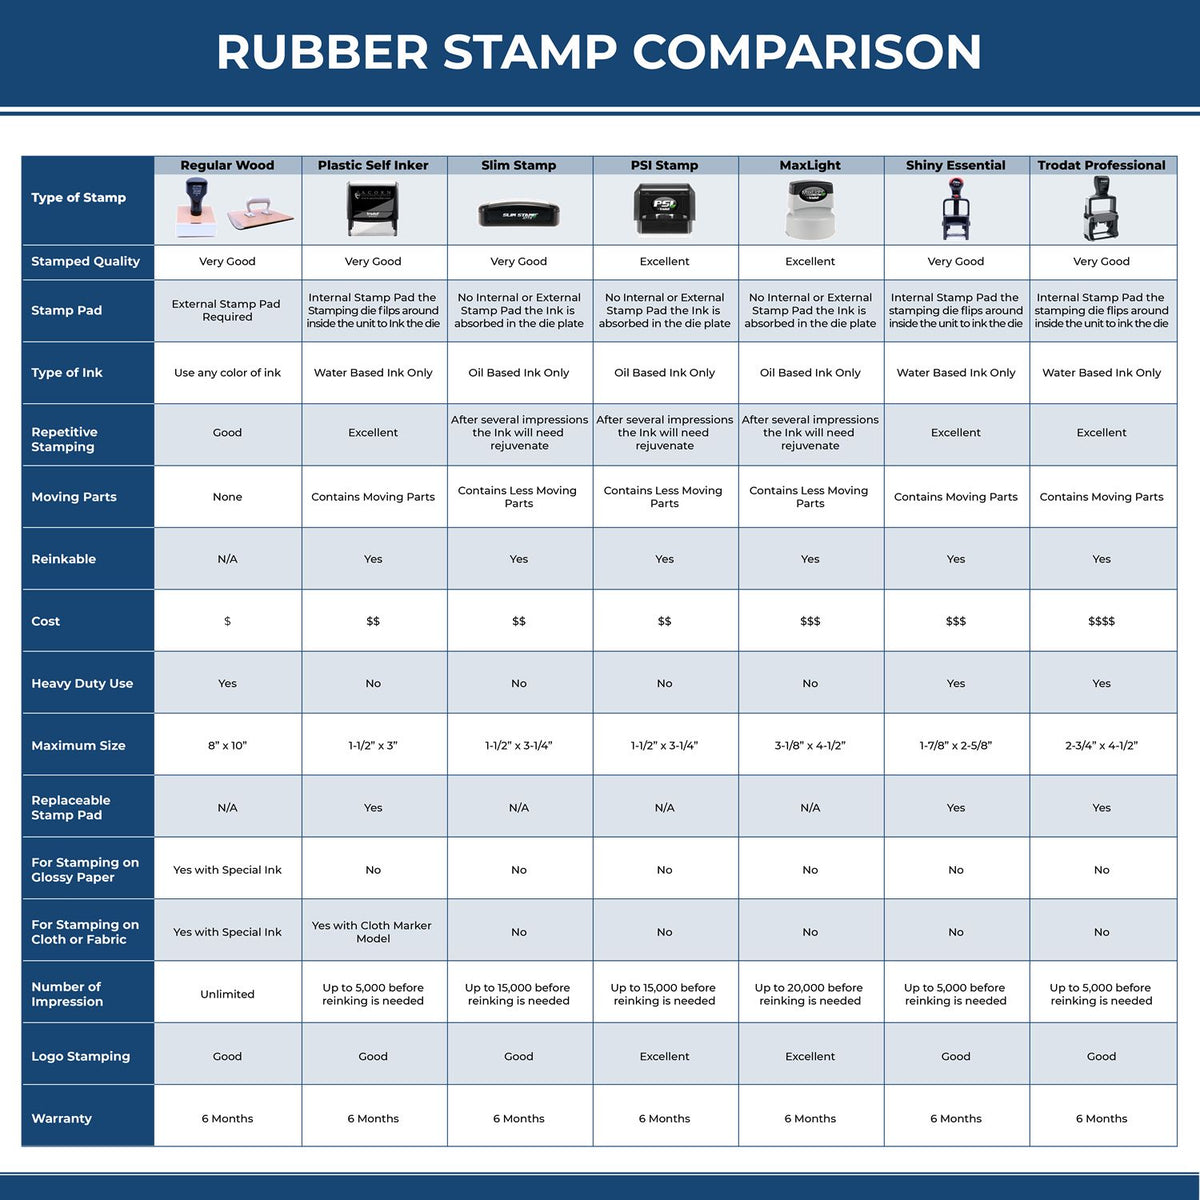 A comparison chart for the different types of mount models available for the MaxLight Premium Pre-Inked Guam Rectangular Notarial Stamp.